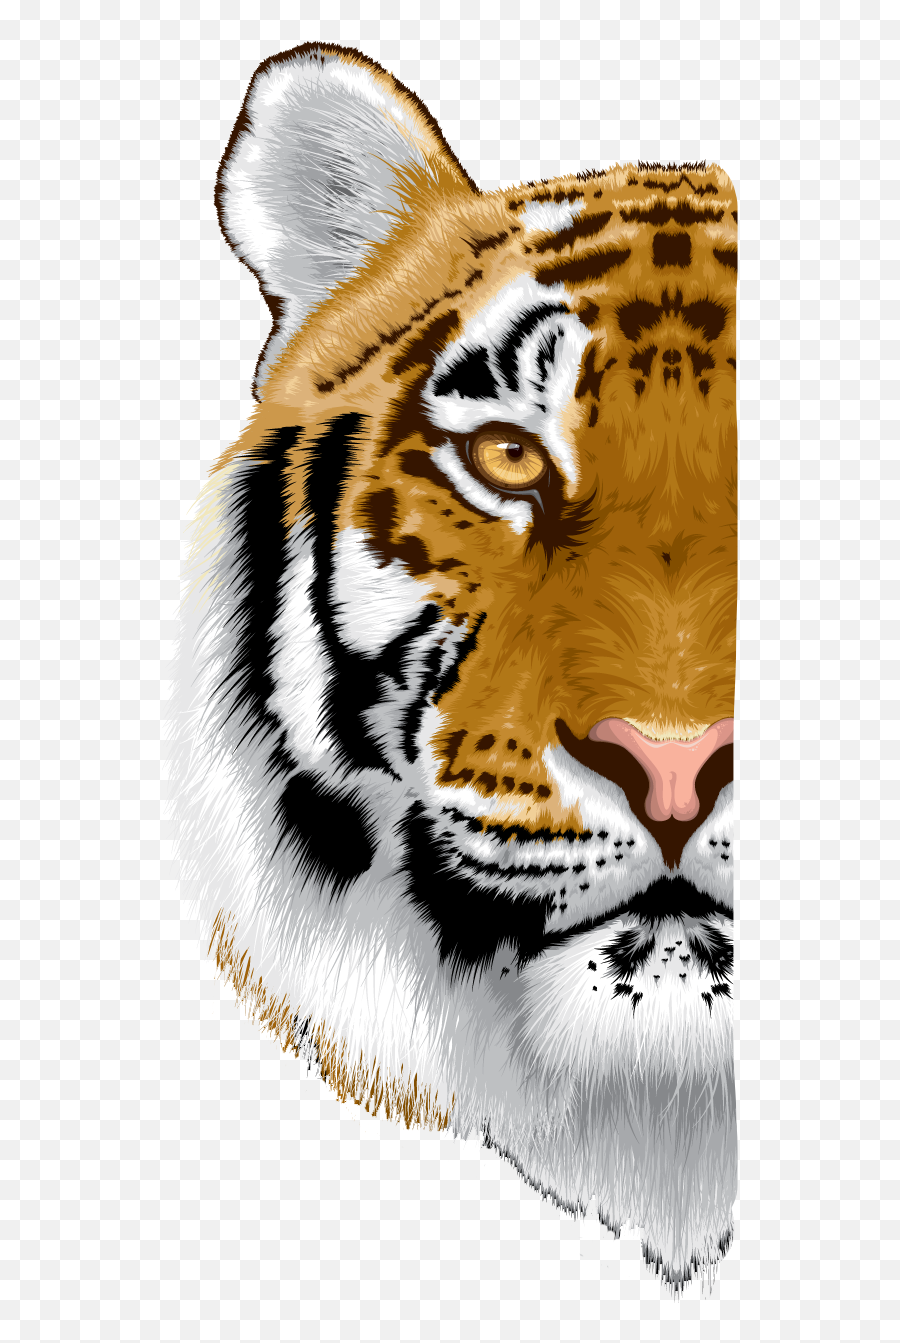 The Newest Tiger Face Stickers On Picsart - Tigers Hd Face Png Emoji,Tiger Face Emoji